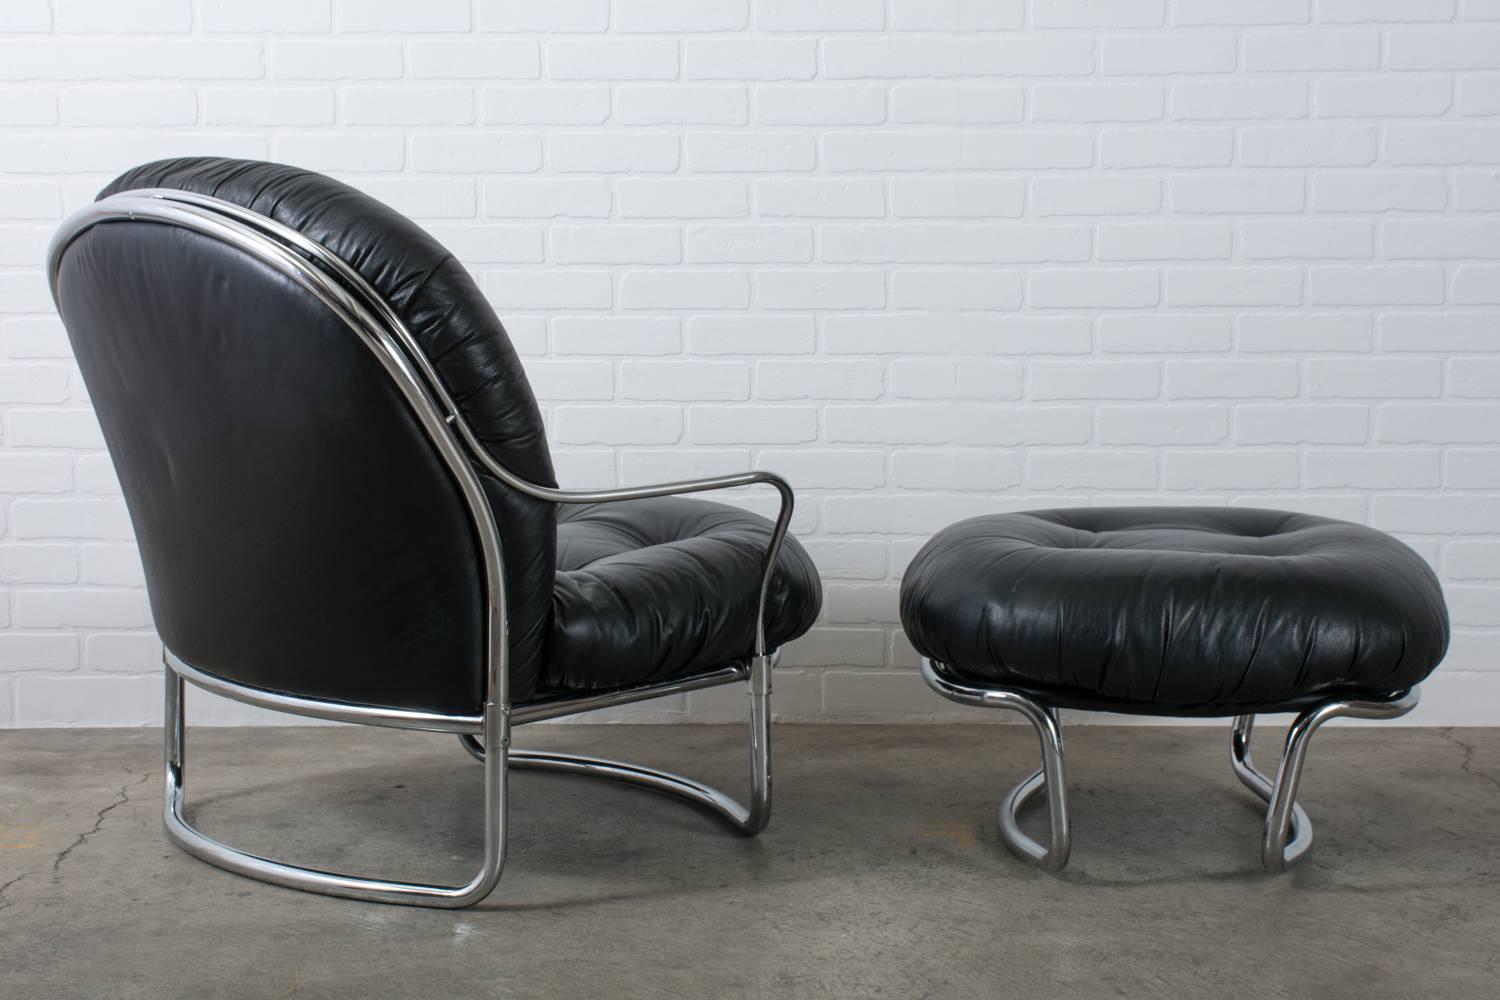 Carlo di Carli Black Leather Lounge Chair and Ottoman, Italy, 1960s In Good Condition For Sale In San Francisco, CA